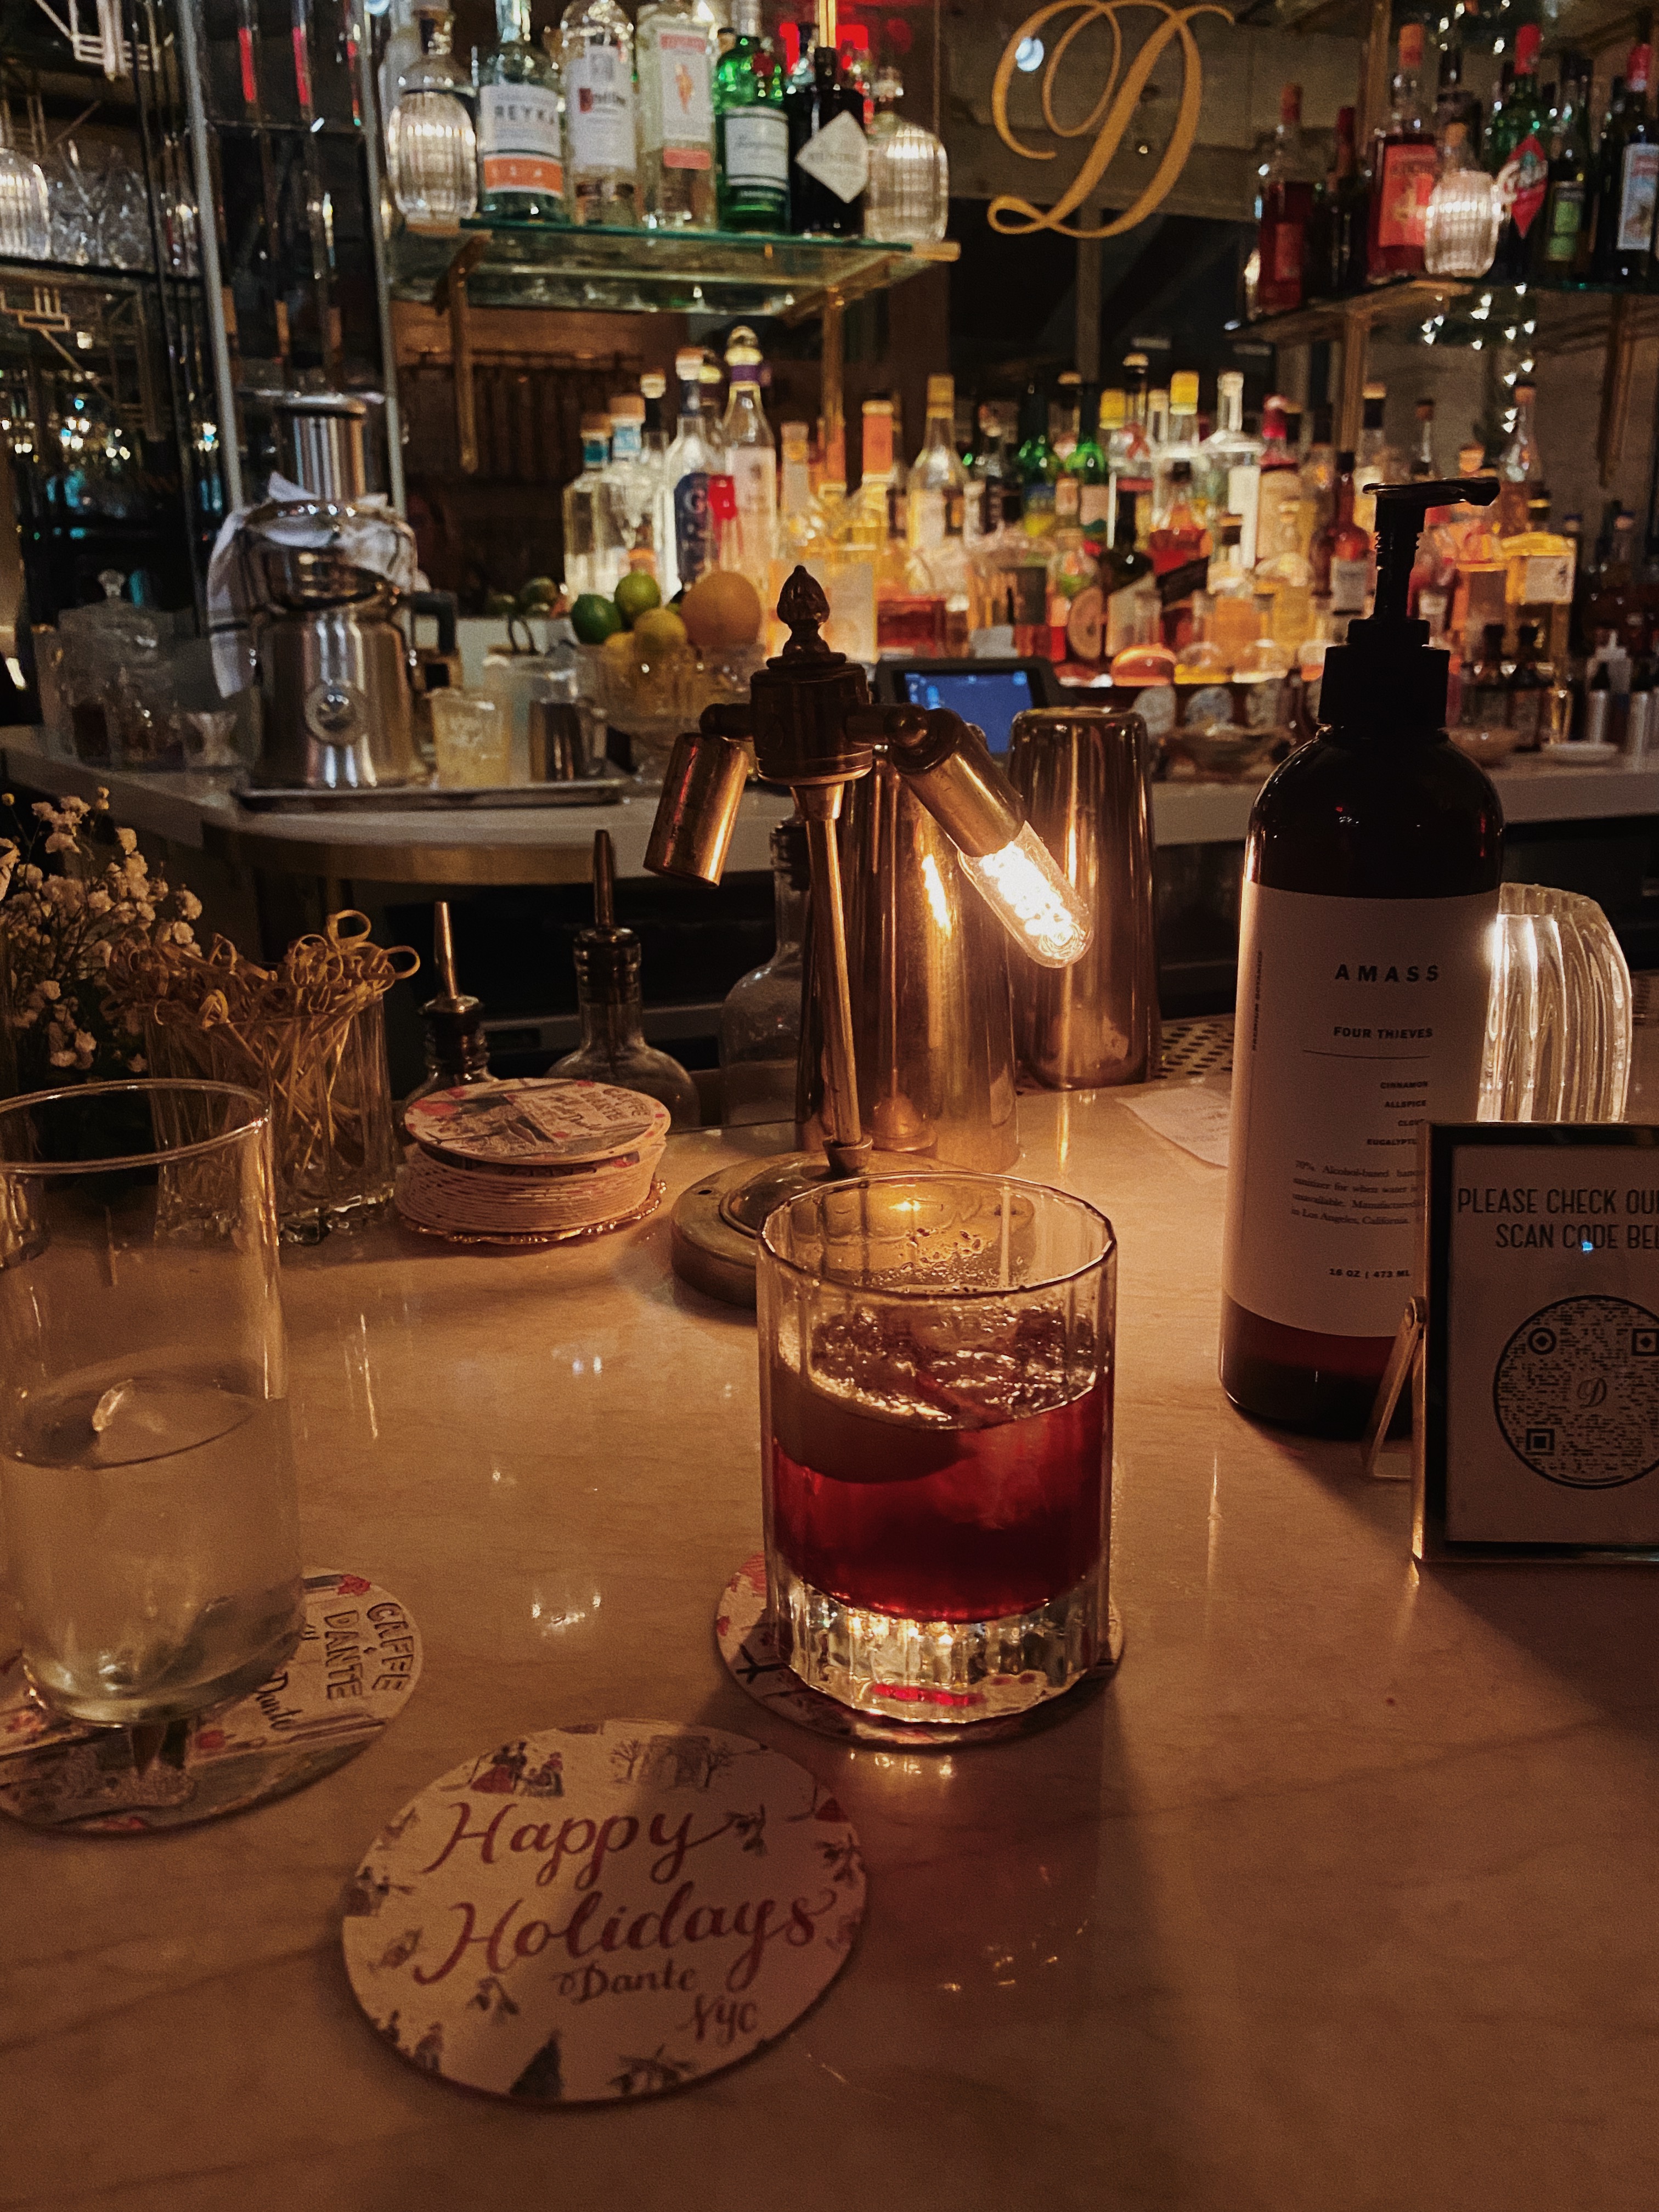 fran acciardo nyc spots restaurants recommendations where to eat in nyc dante negroni